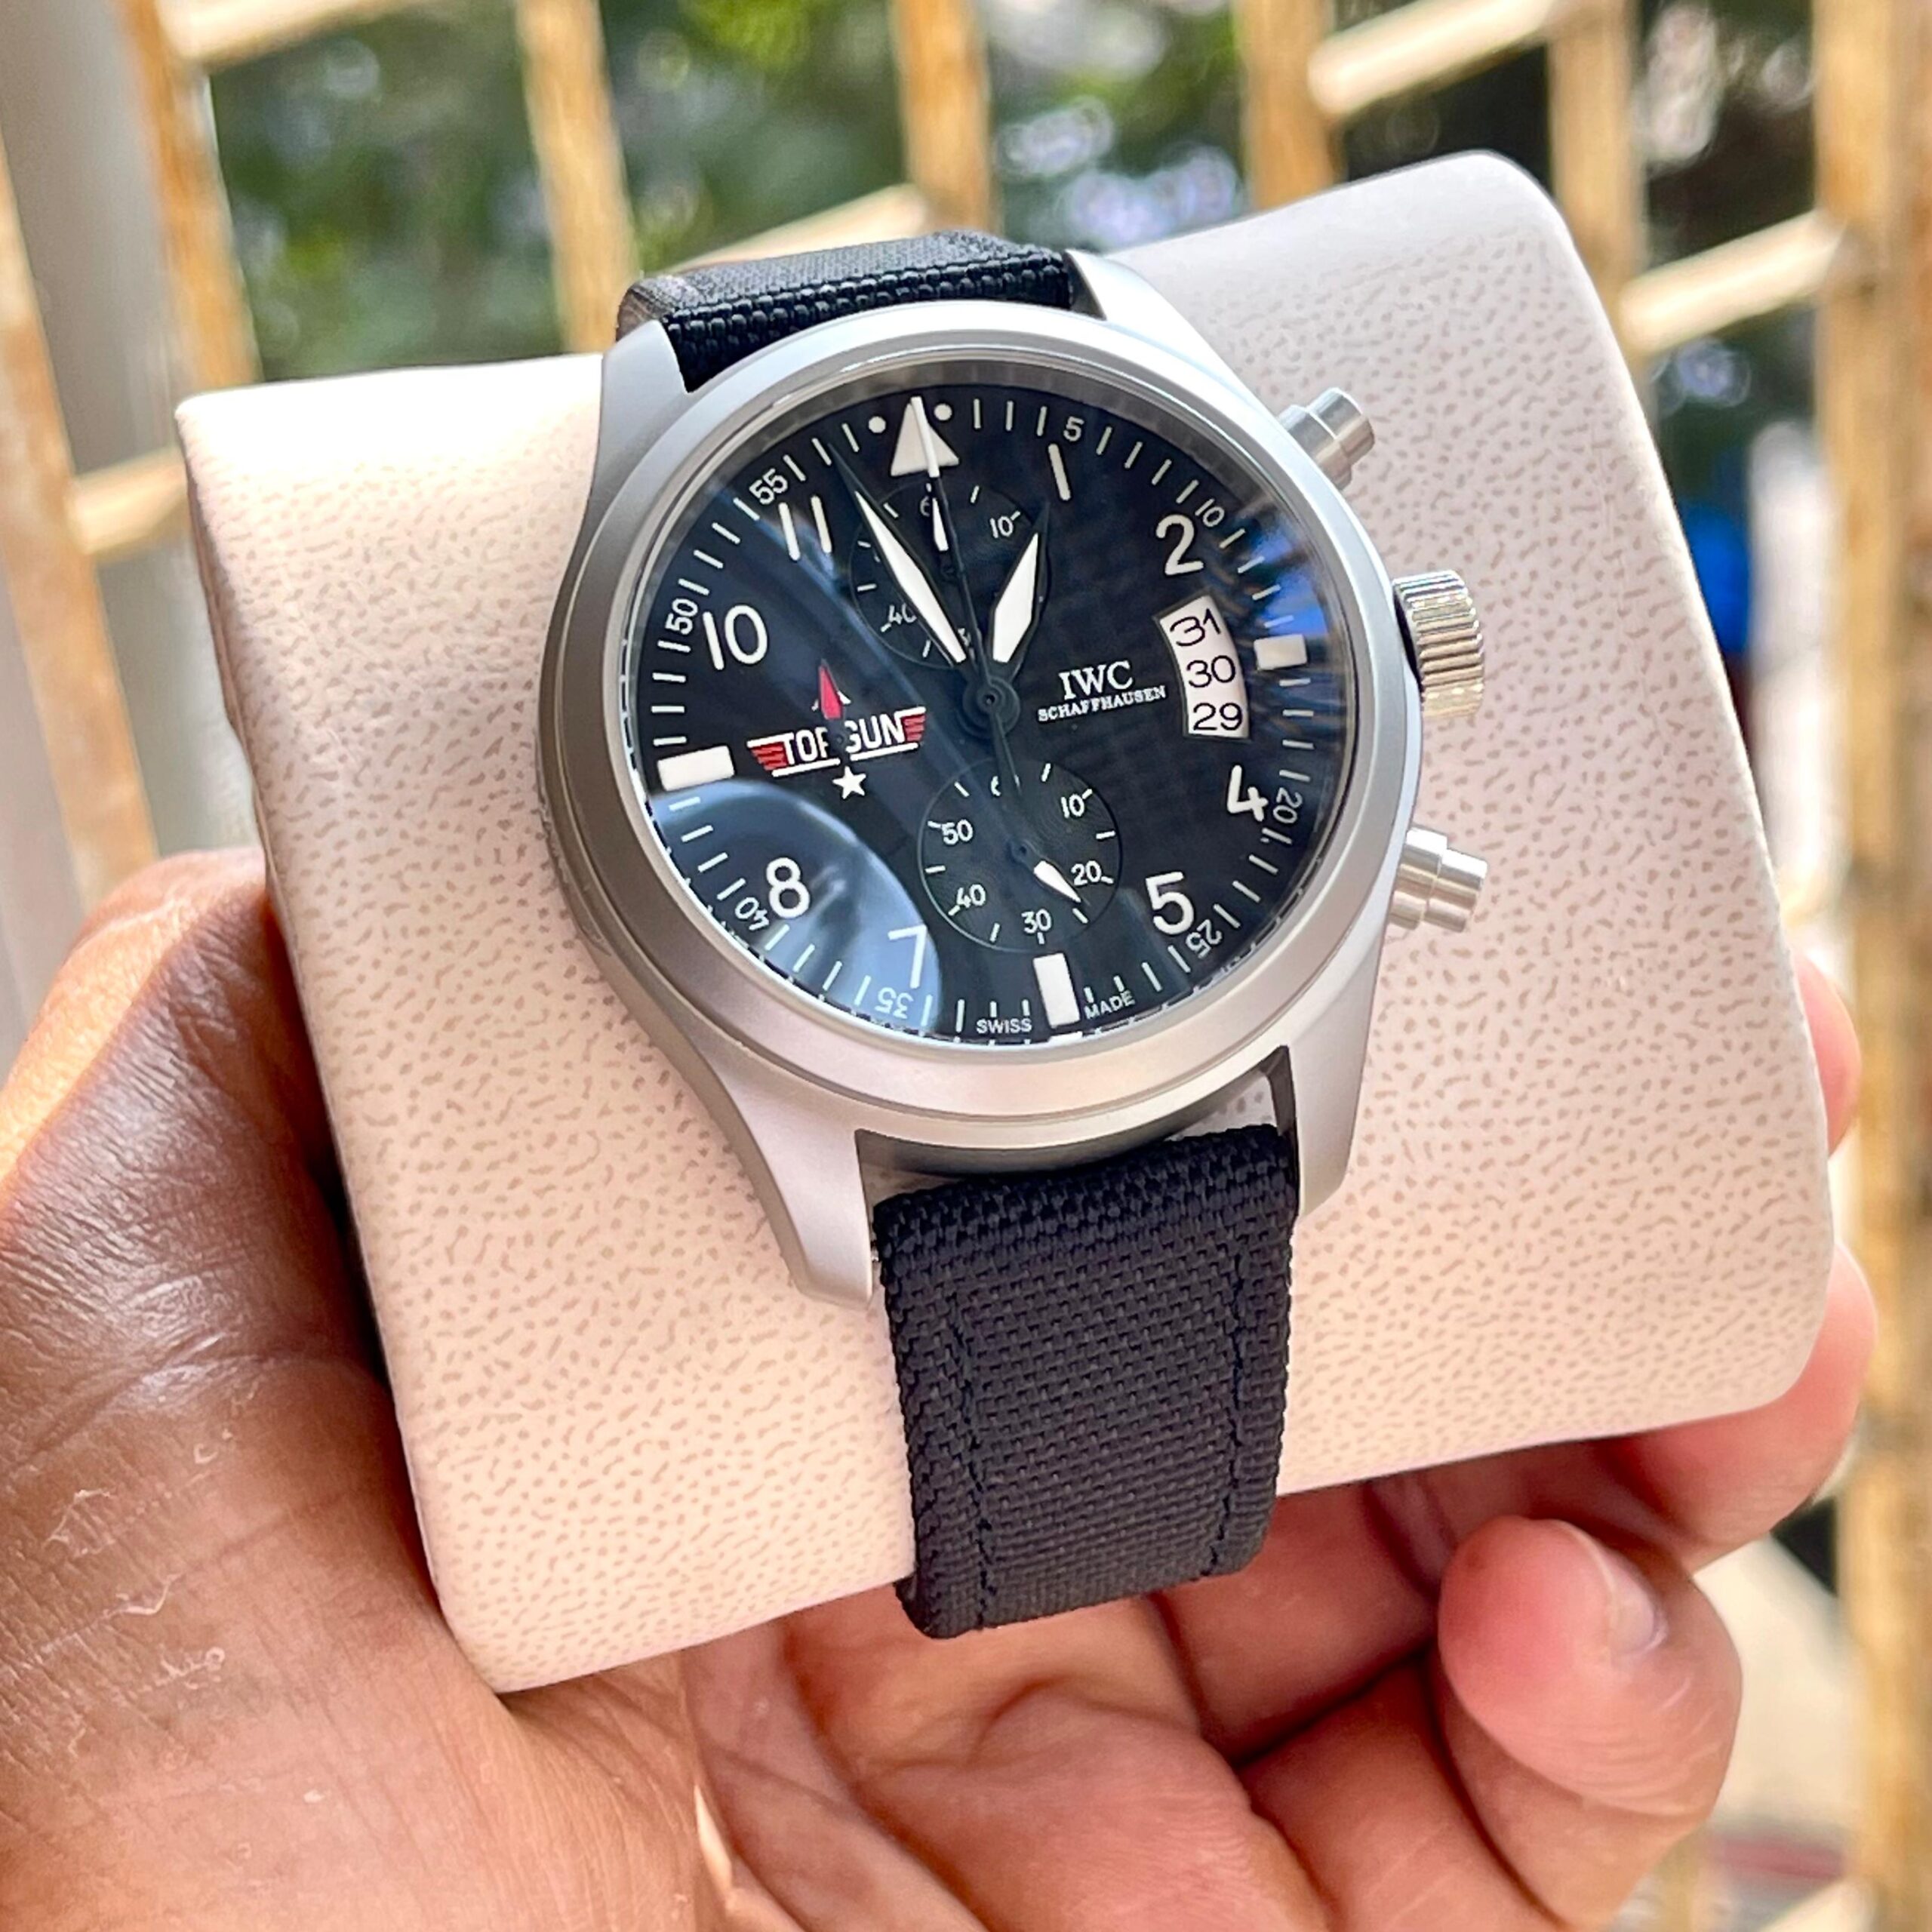 IWC Schaffhausen 7A Ultra Premium Pilot’s Watch 43mm Stainless Steel with Chronograph, Date Counter, and Japanese Quartz Mastery